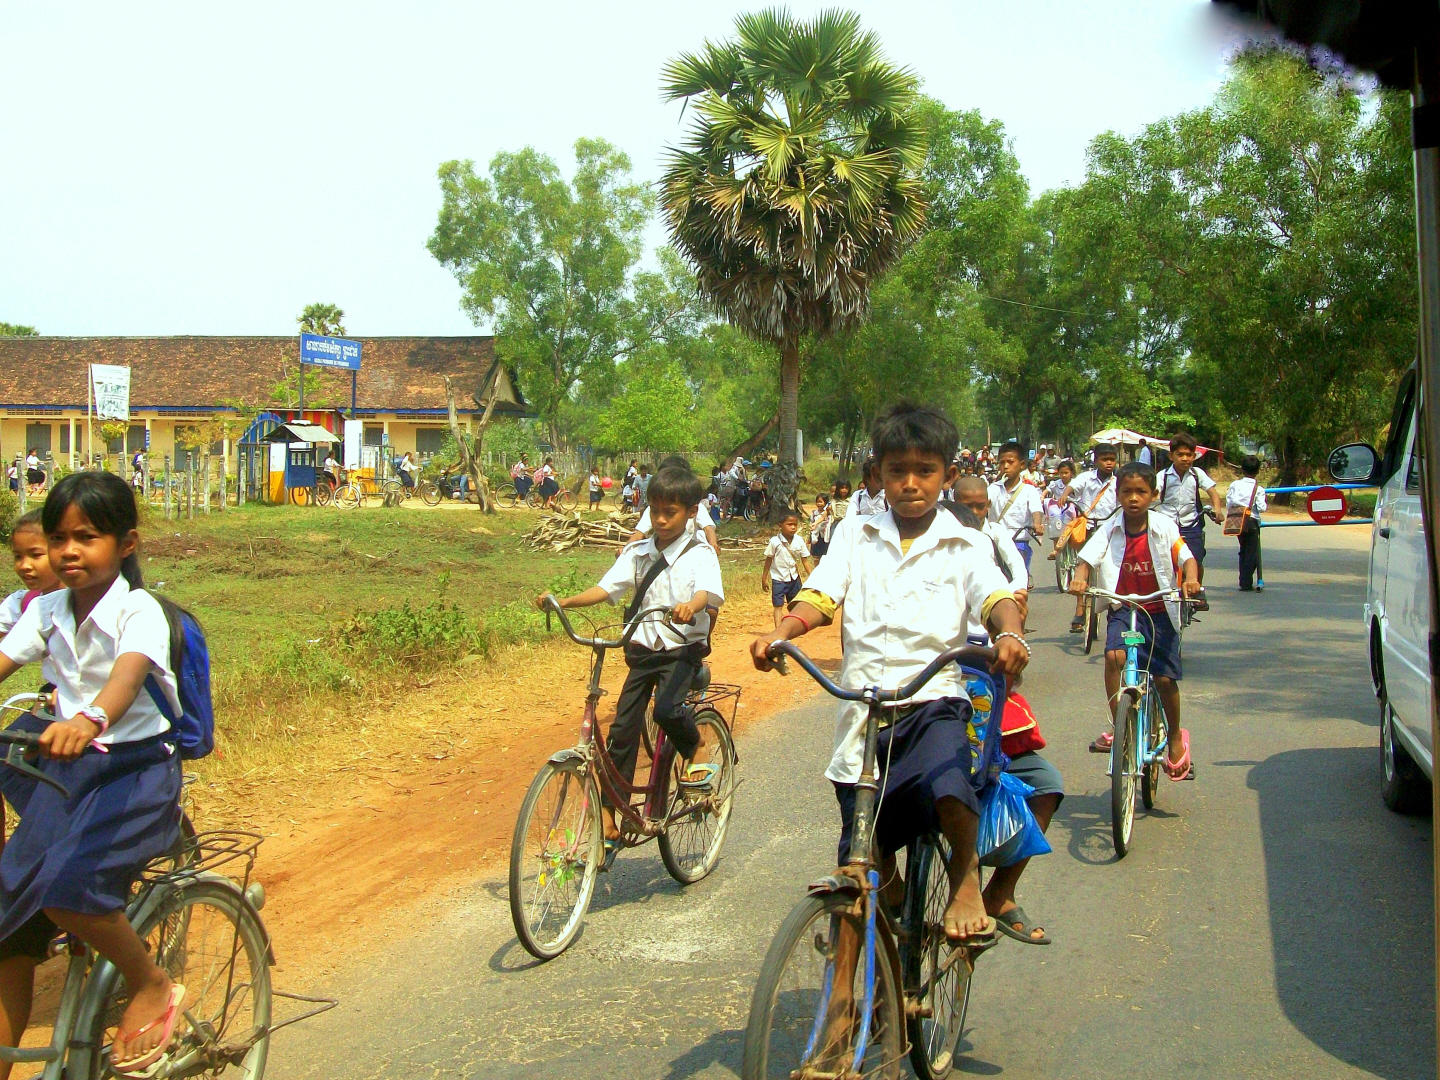 School children on the road between Luang Prabang & Banteay Srey outlying temple = Cambodia